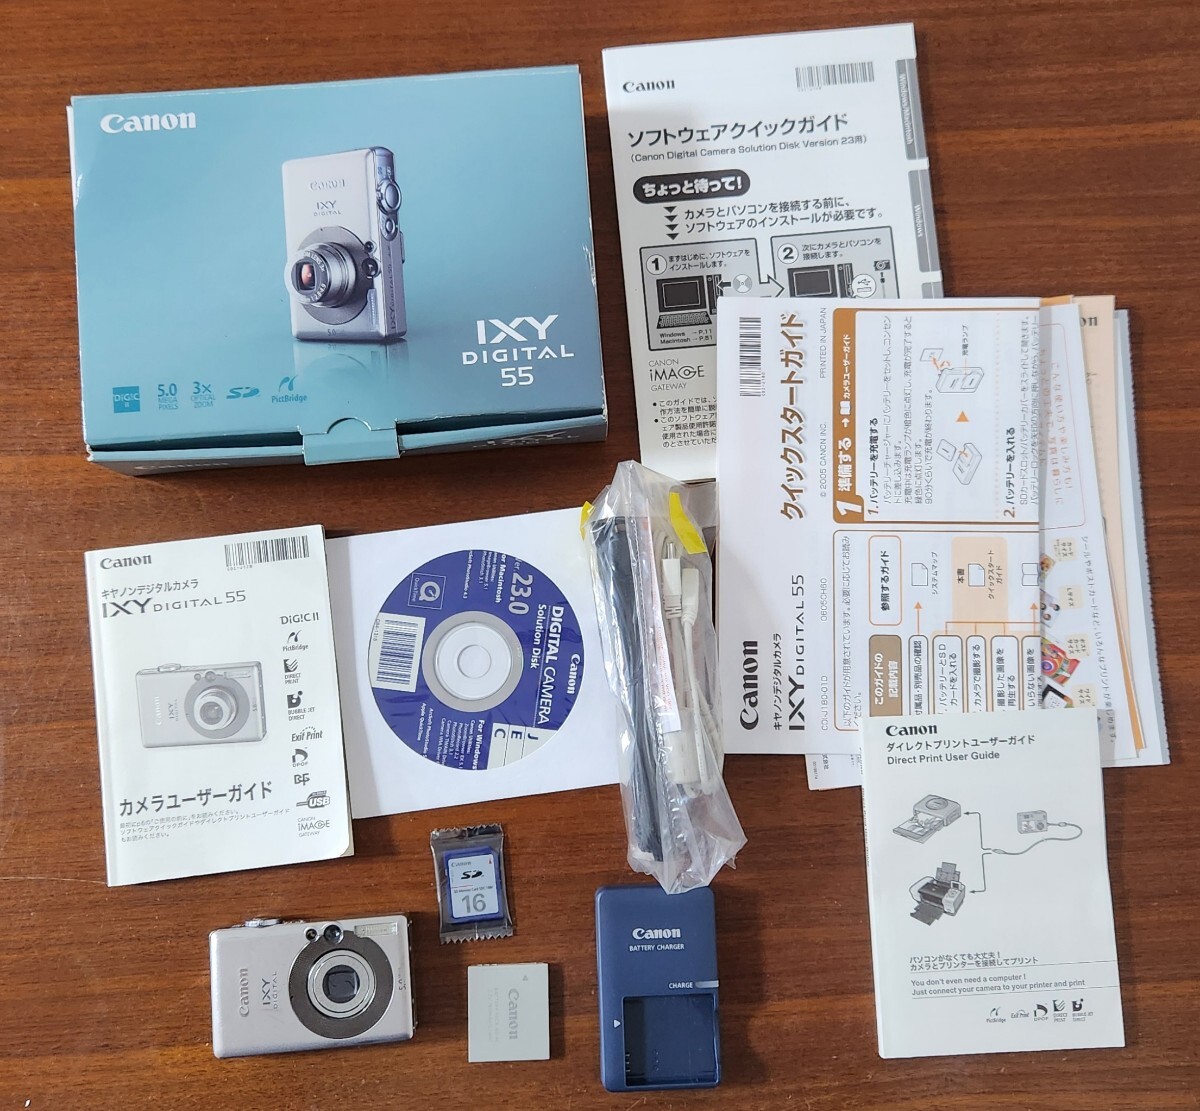 Canon IXY DIGITAL 55 IXYD55 operation excellent accessory all have! at that time buy privilege Canon SD card unopened have!CCD sensor! trader resale ya- is explanatory note . reading 